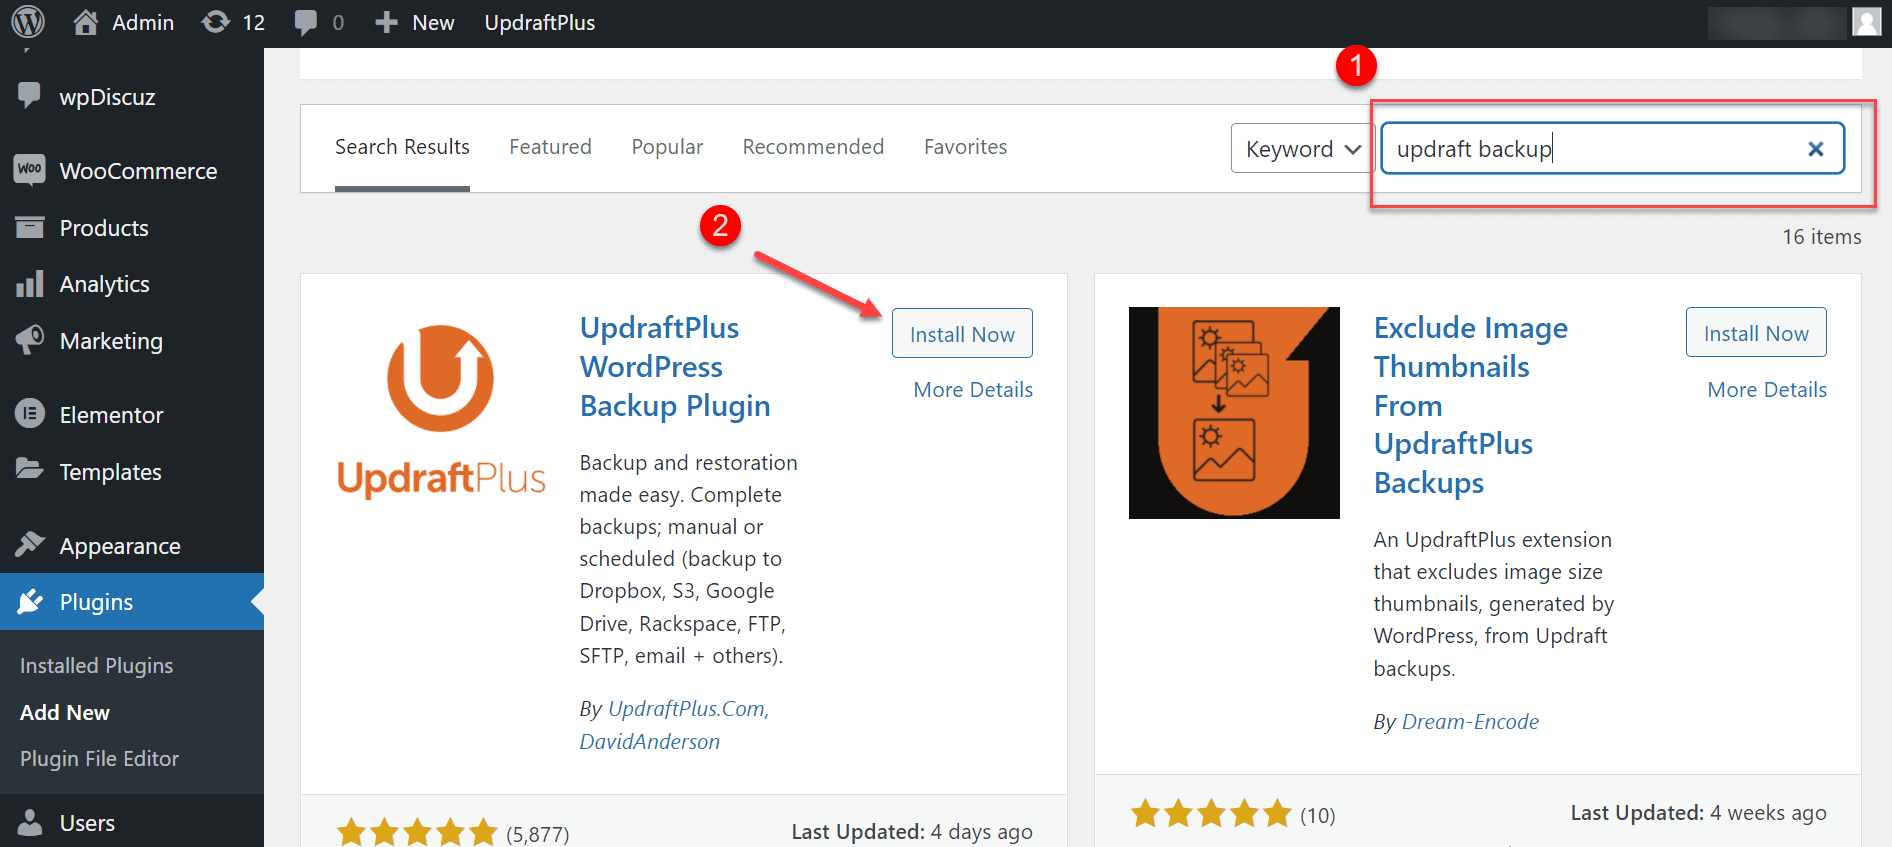 Search And Install The Updraftplus Wordpress Backup Plugin
